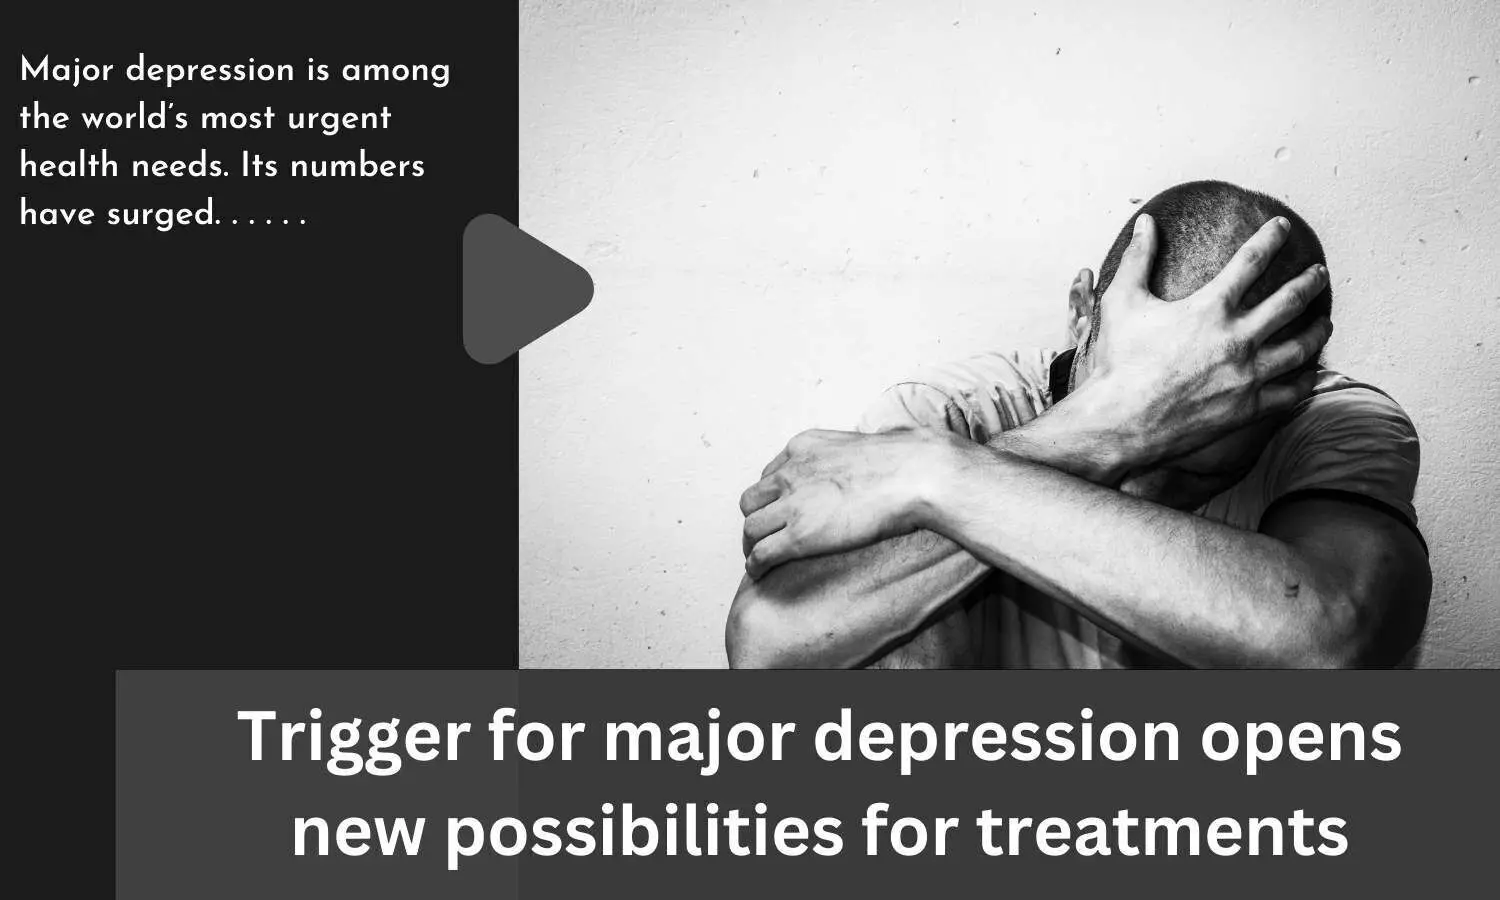 Trigger for major depression opens new possibilities for treatments